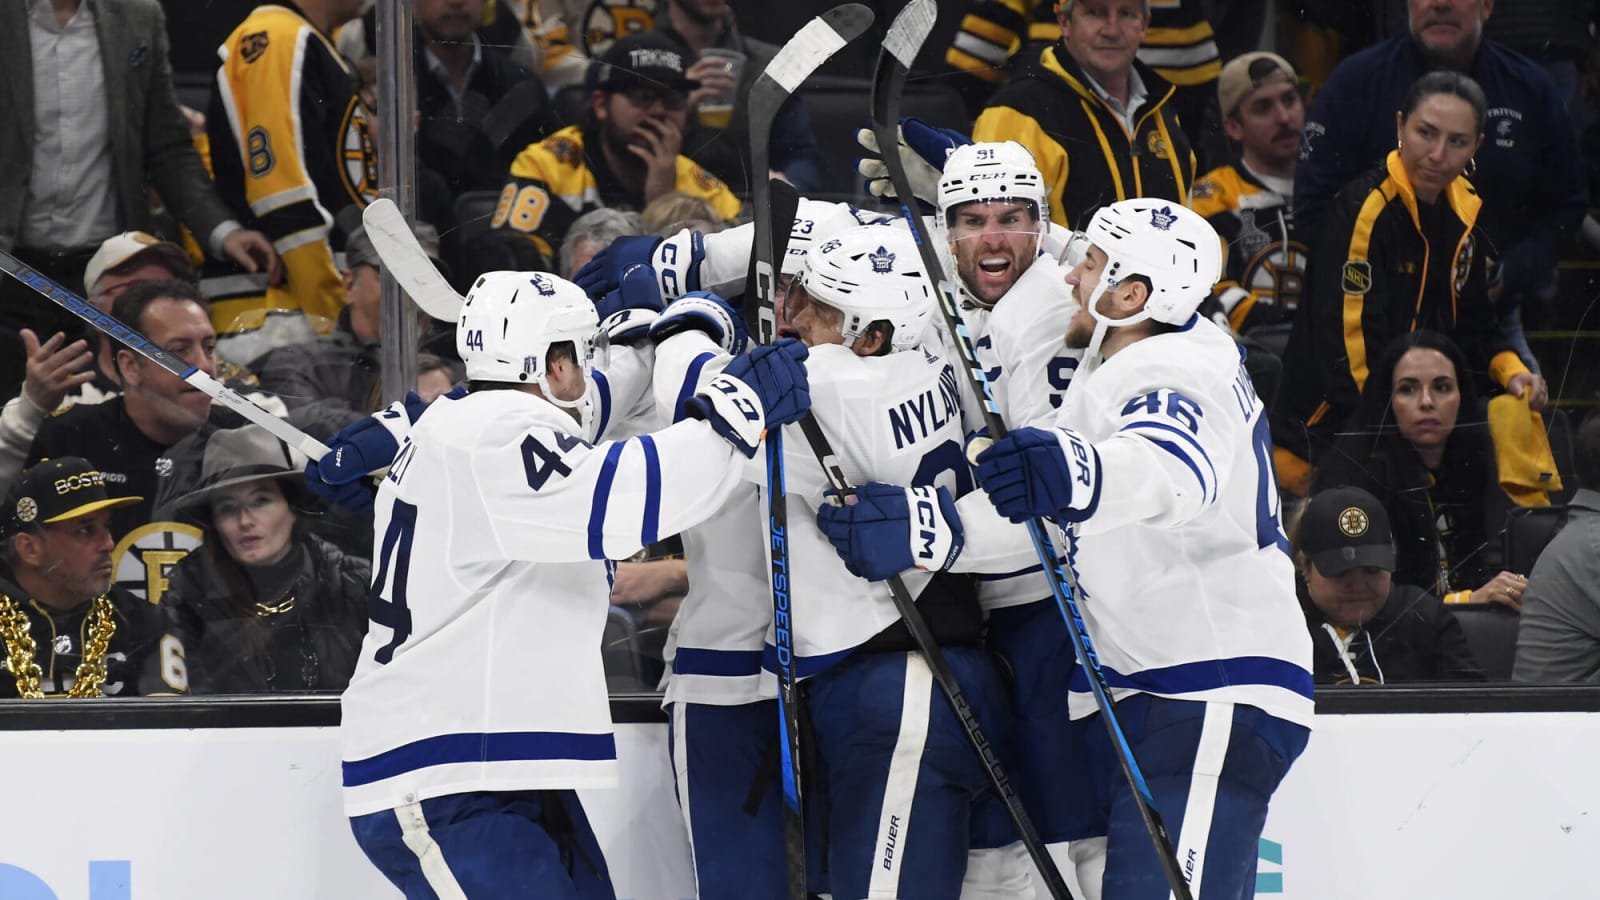 Game 5 takeaways: Woll, Domi, Knies keep the Maple Leafs alive